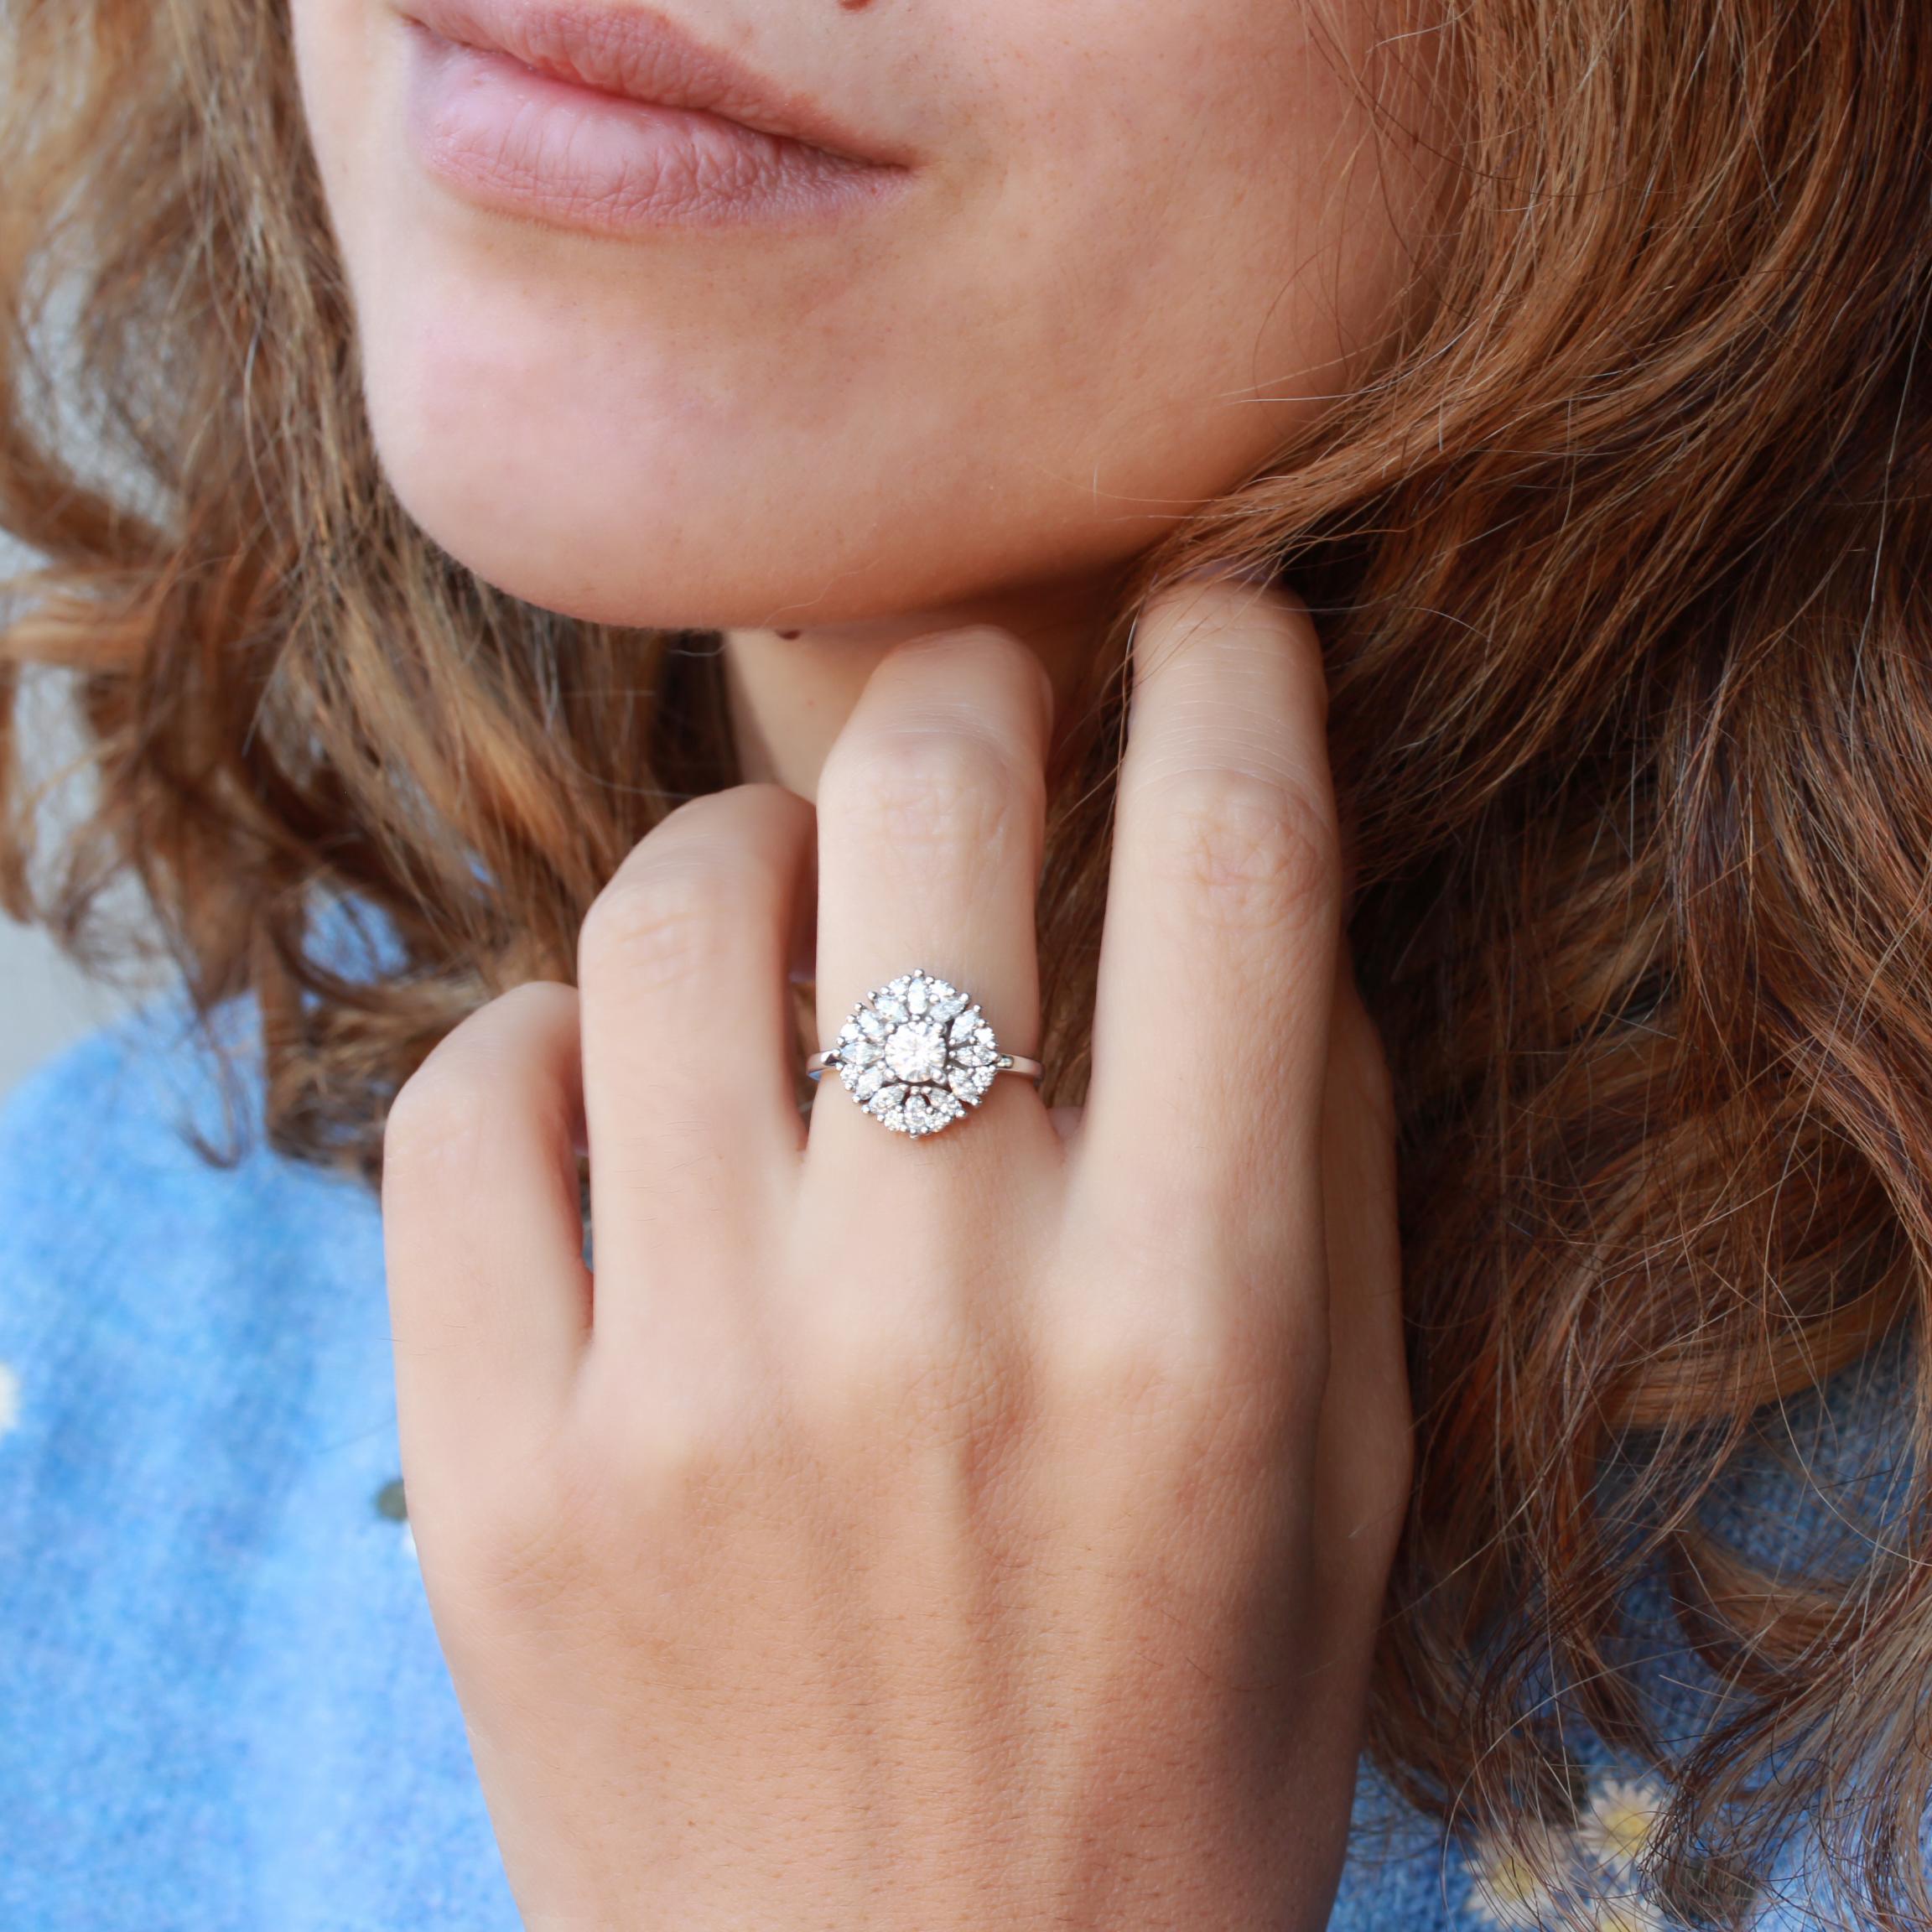 The Harper ring is a ballerina-style engagement ring, perfect as an engagement ring to a statement diamond ring. READY TO SHIP!
This list is for the engagement ring only.
Handmade with care.
An original design by Silly Shiny Diamonds. 

Details: 
*